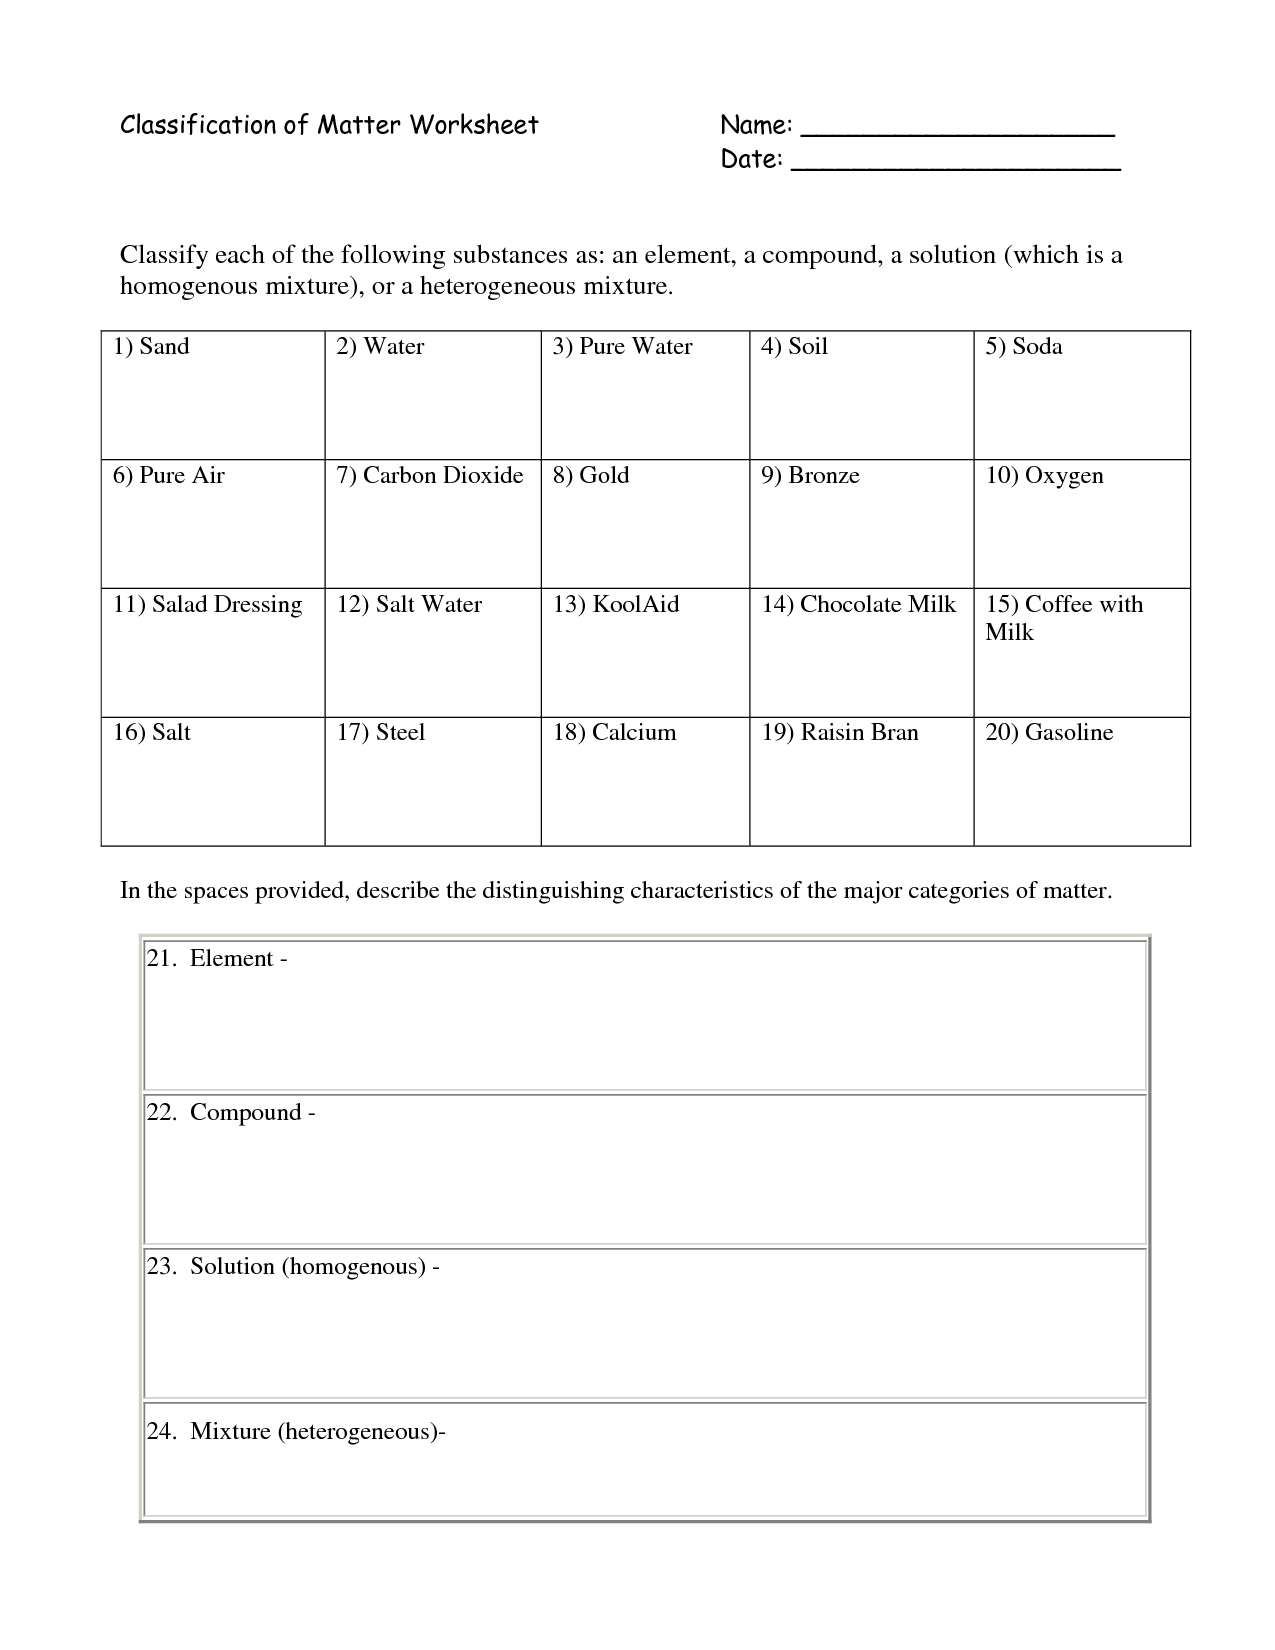 Chapter 15 Classification Of Matter Worksheet Answers